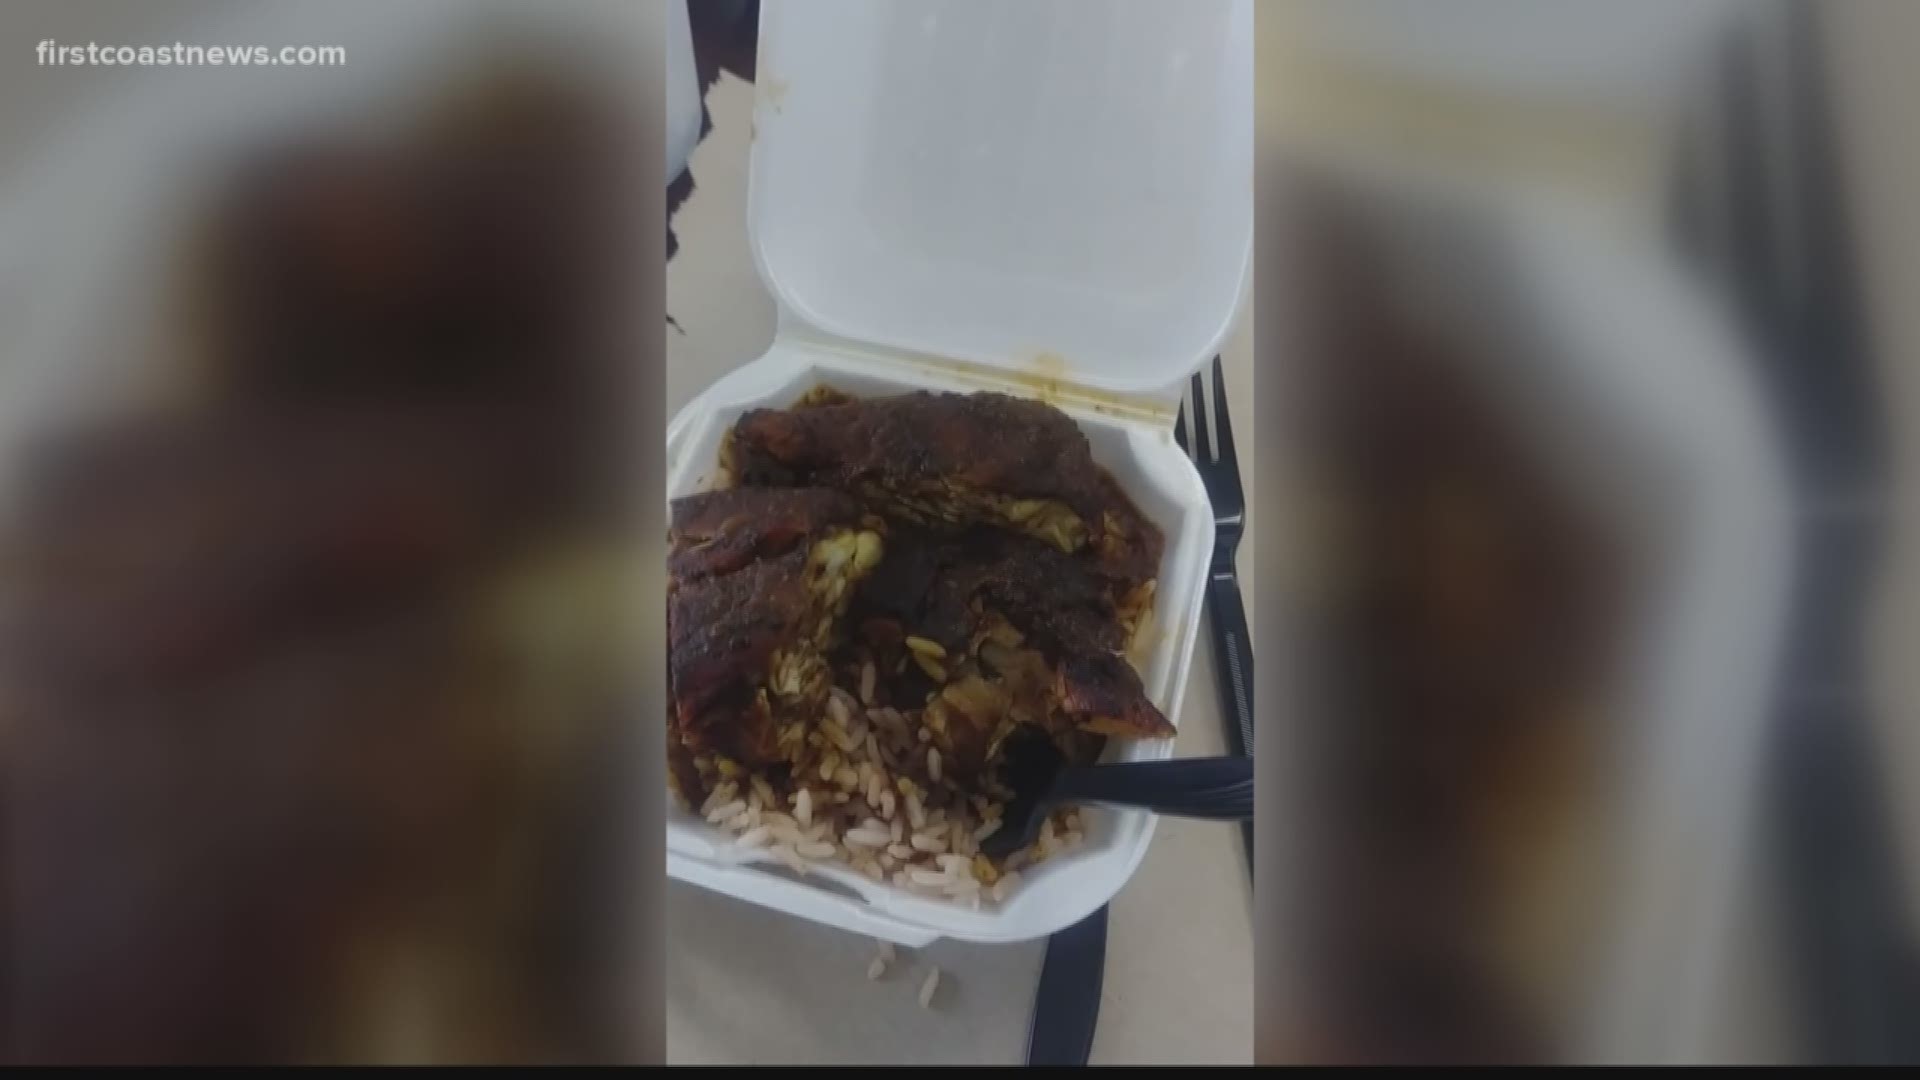 A woman got a to-go order from Caribbean Sunrise Bakery on Main St. near Downtown Jacksonville. When she arrived back at work with her order, she found maggots in her chicken.